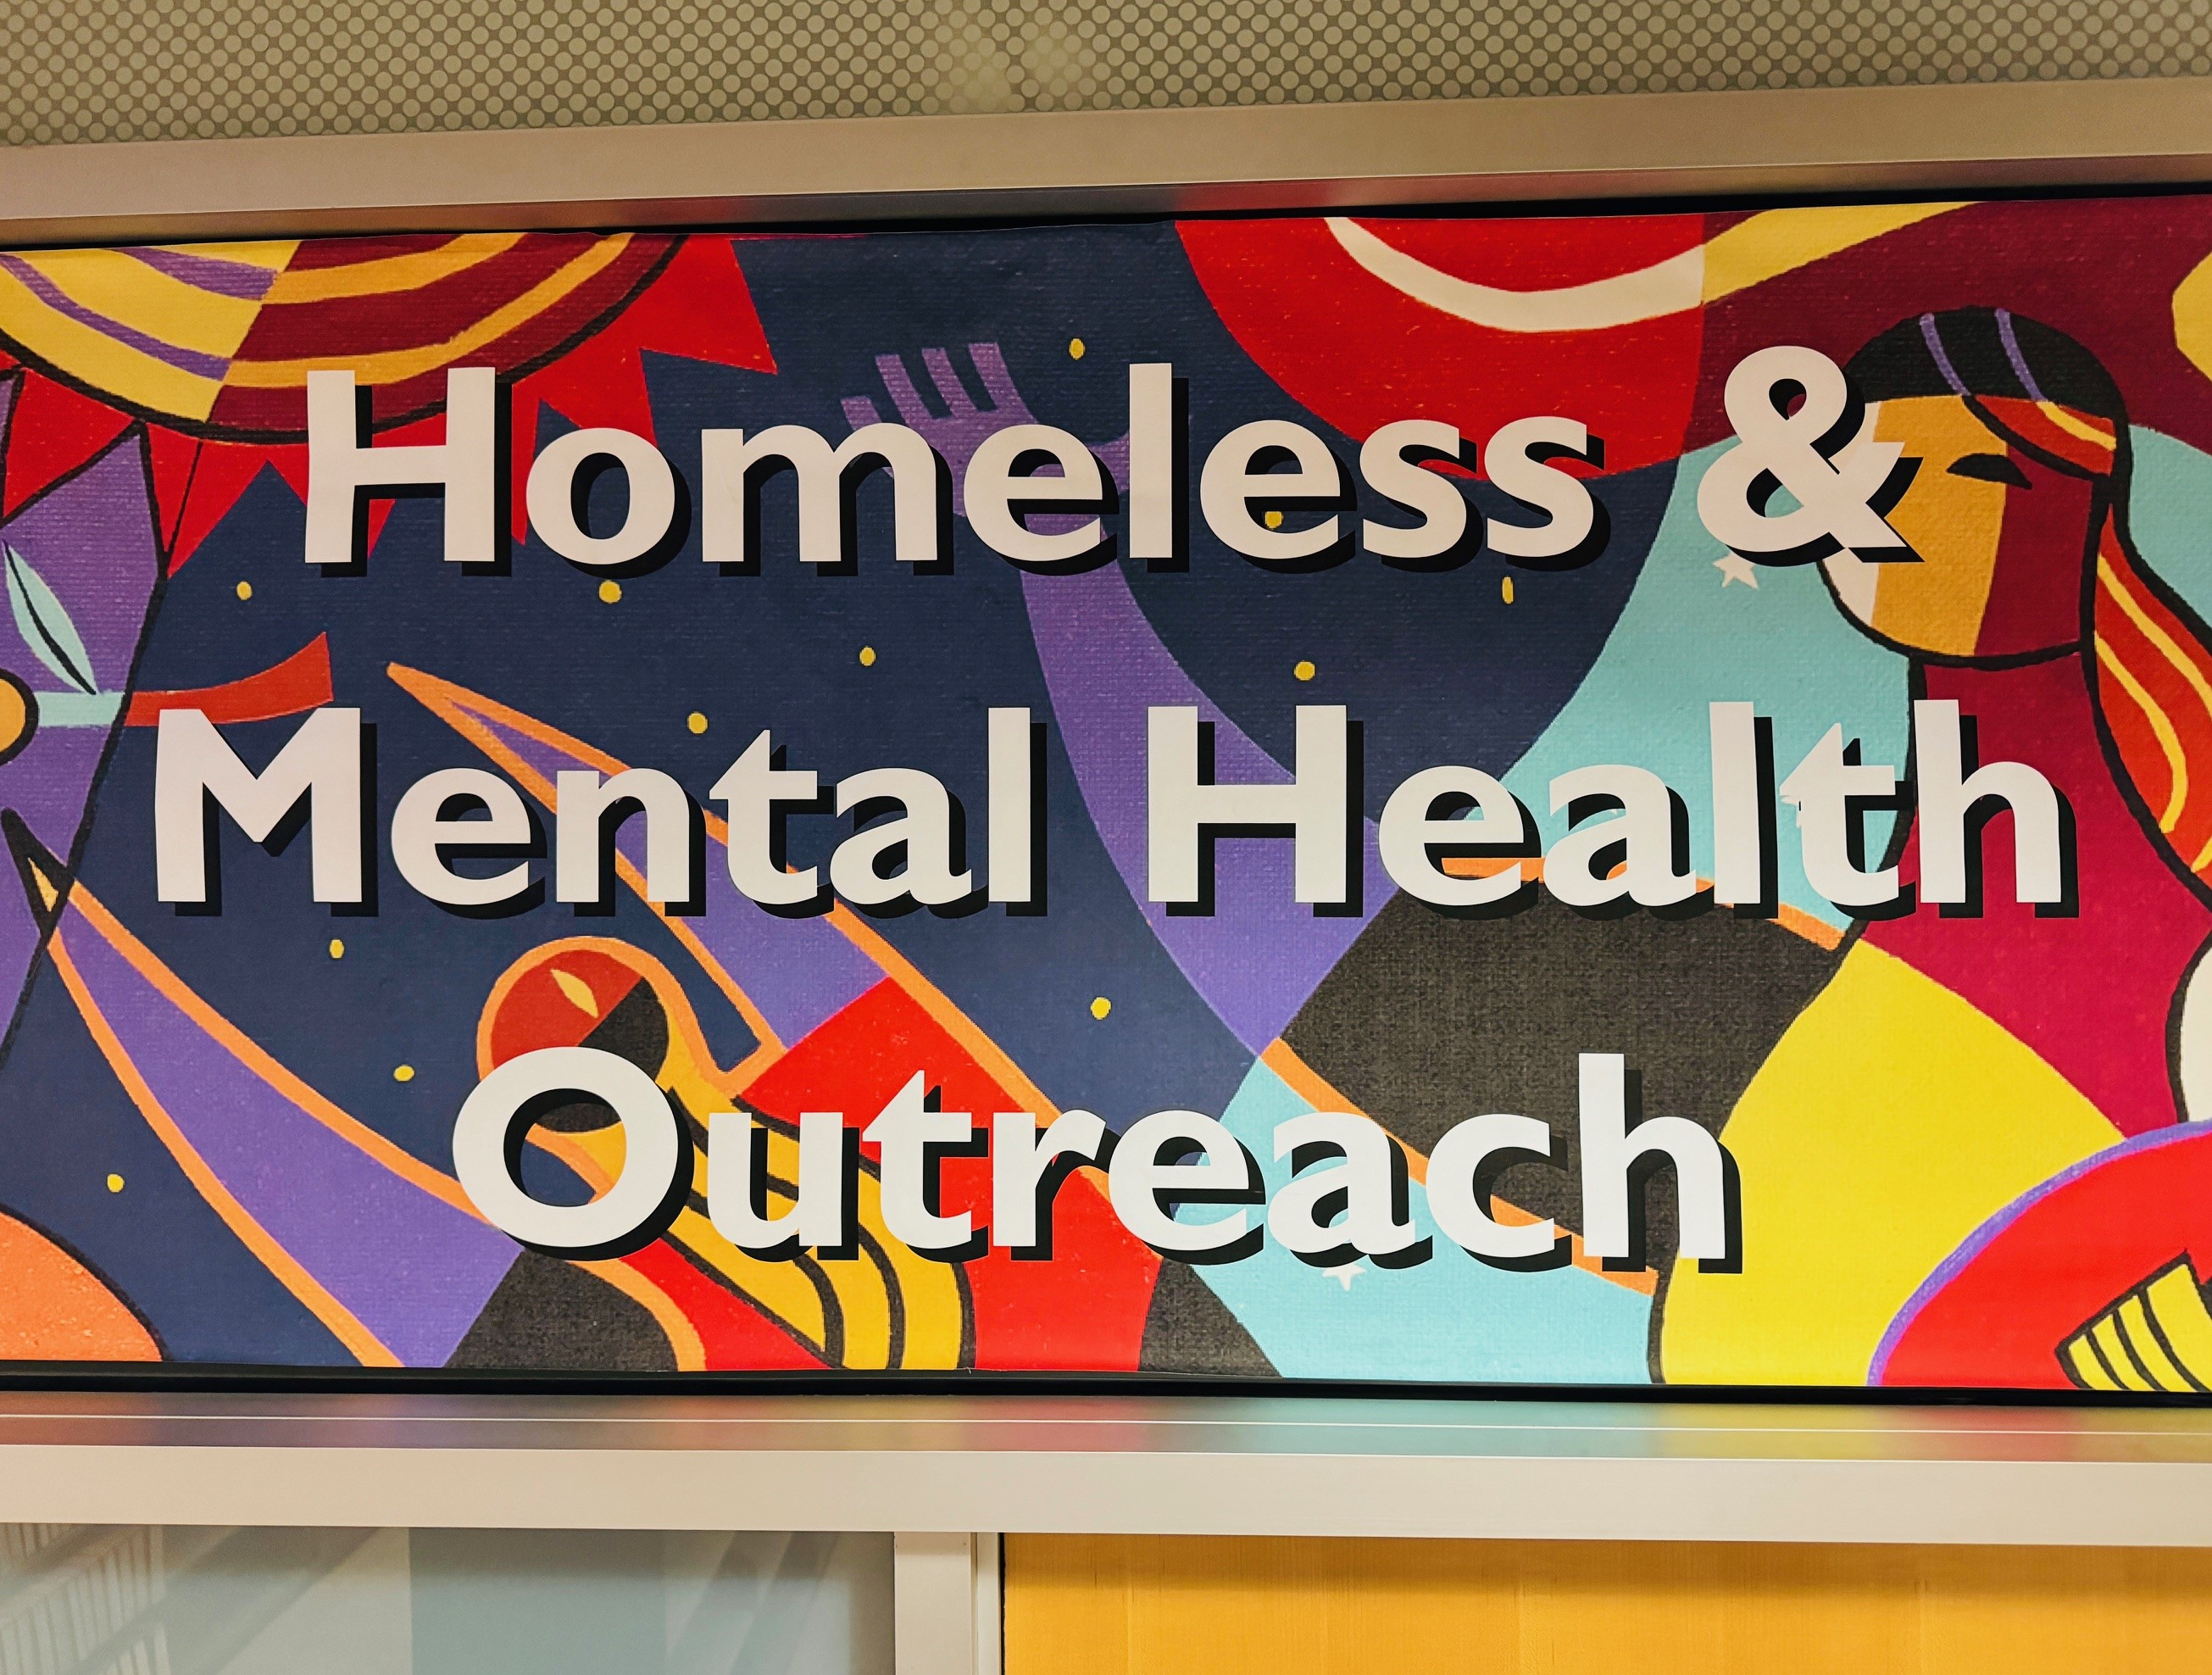 Homeless and Mental Health Outreach sign